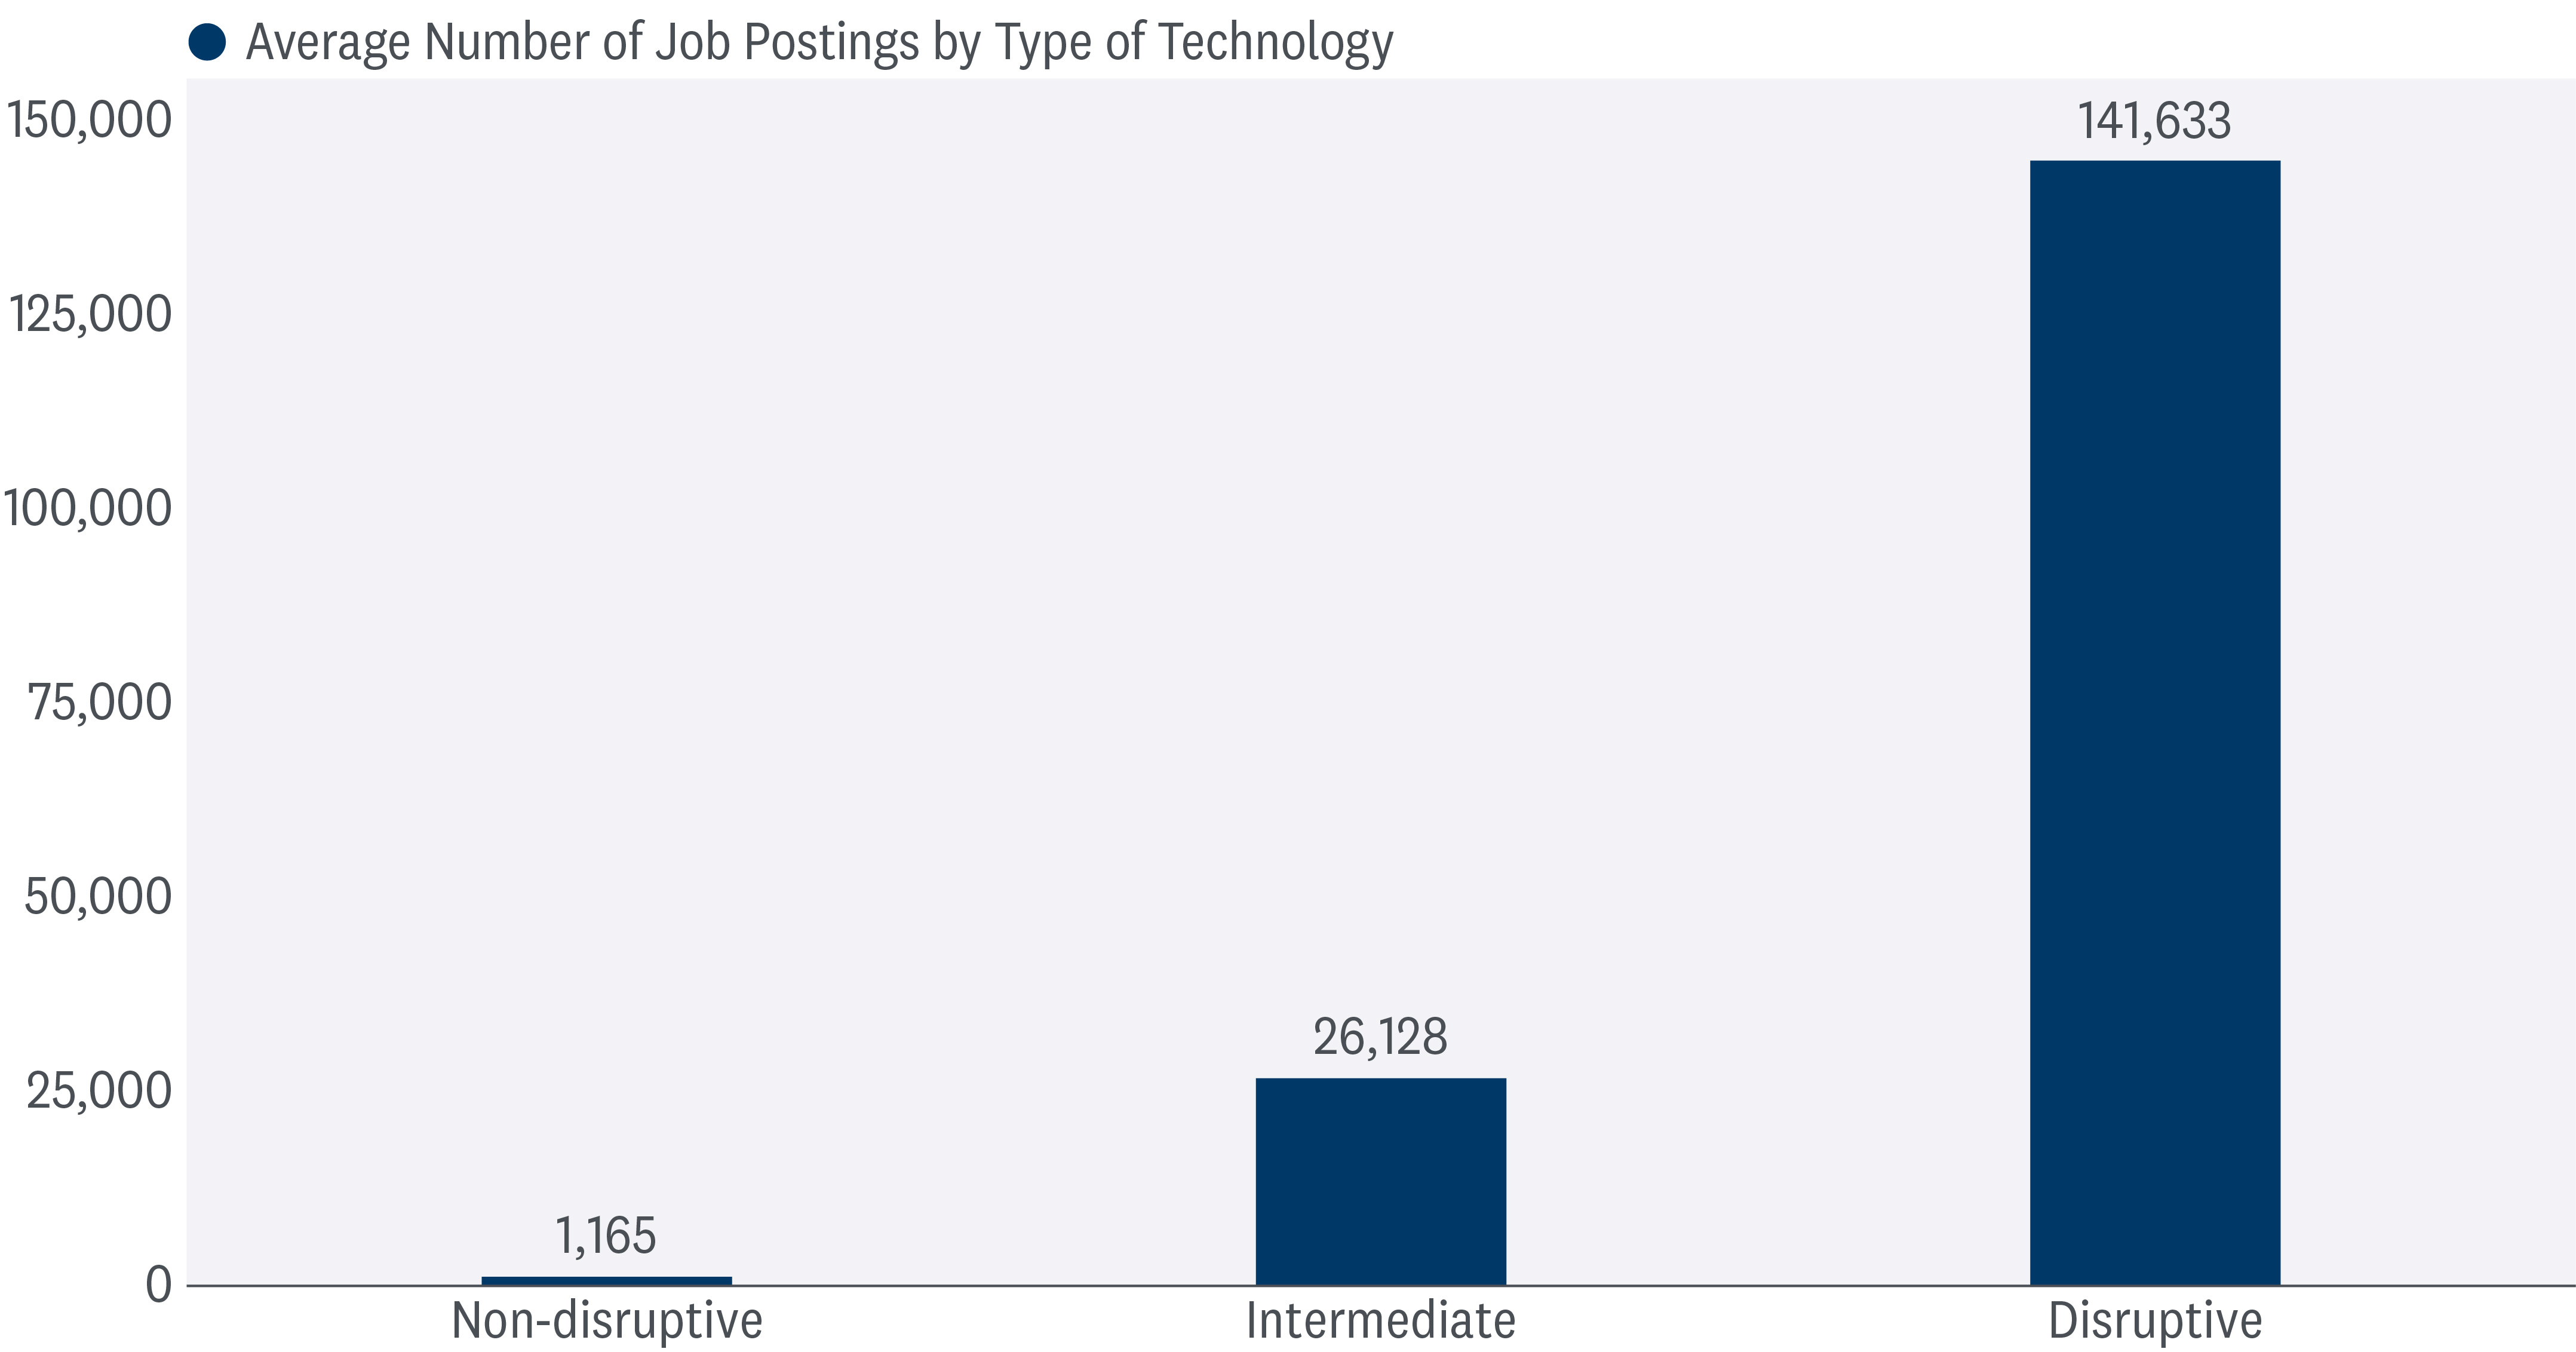 Bar graph of the average number of job postings by type of technology - non-disruptive, intermediate, and disruptive. 